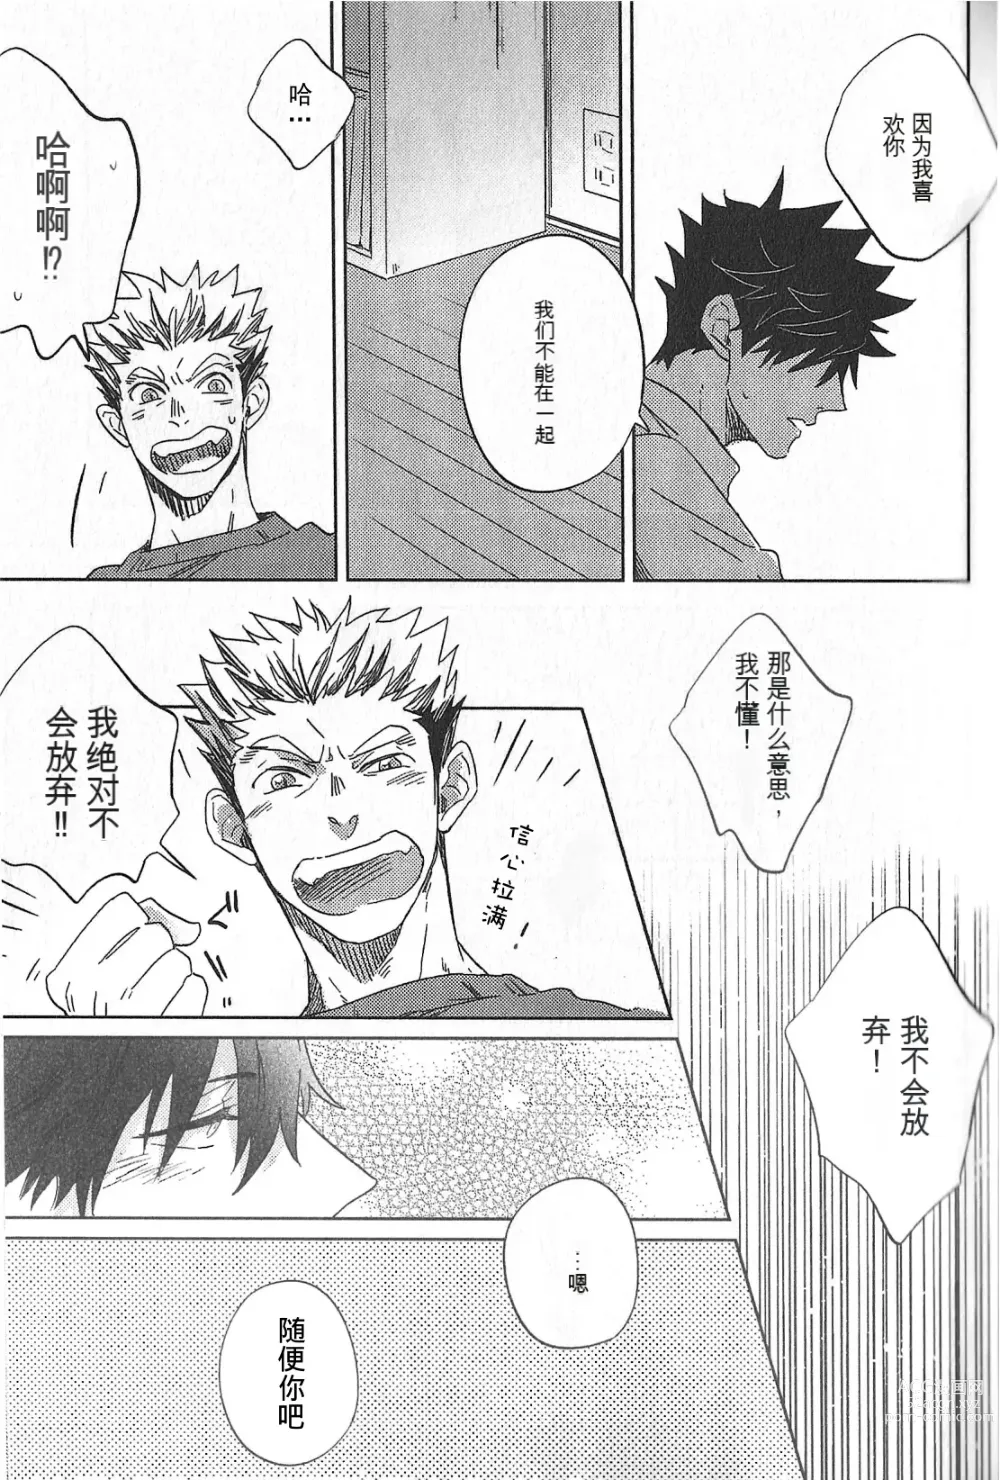 Page 10 of doujinshi 极境的野兽 前篇